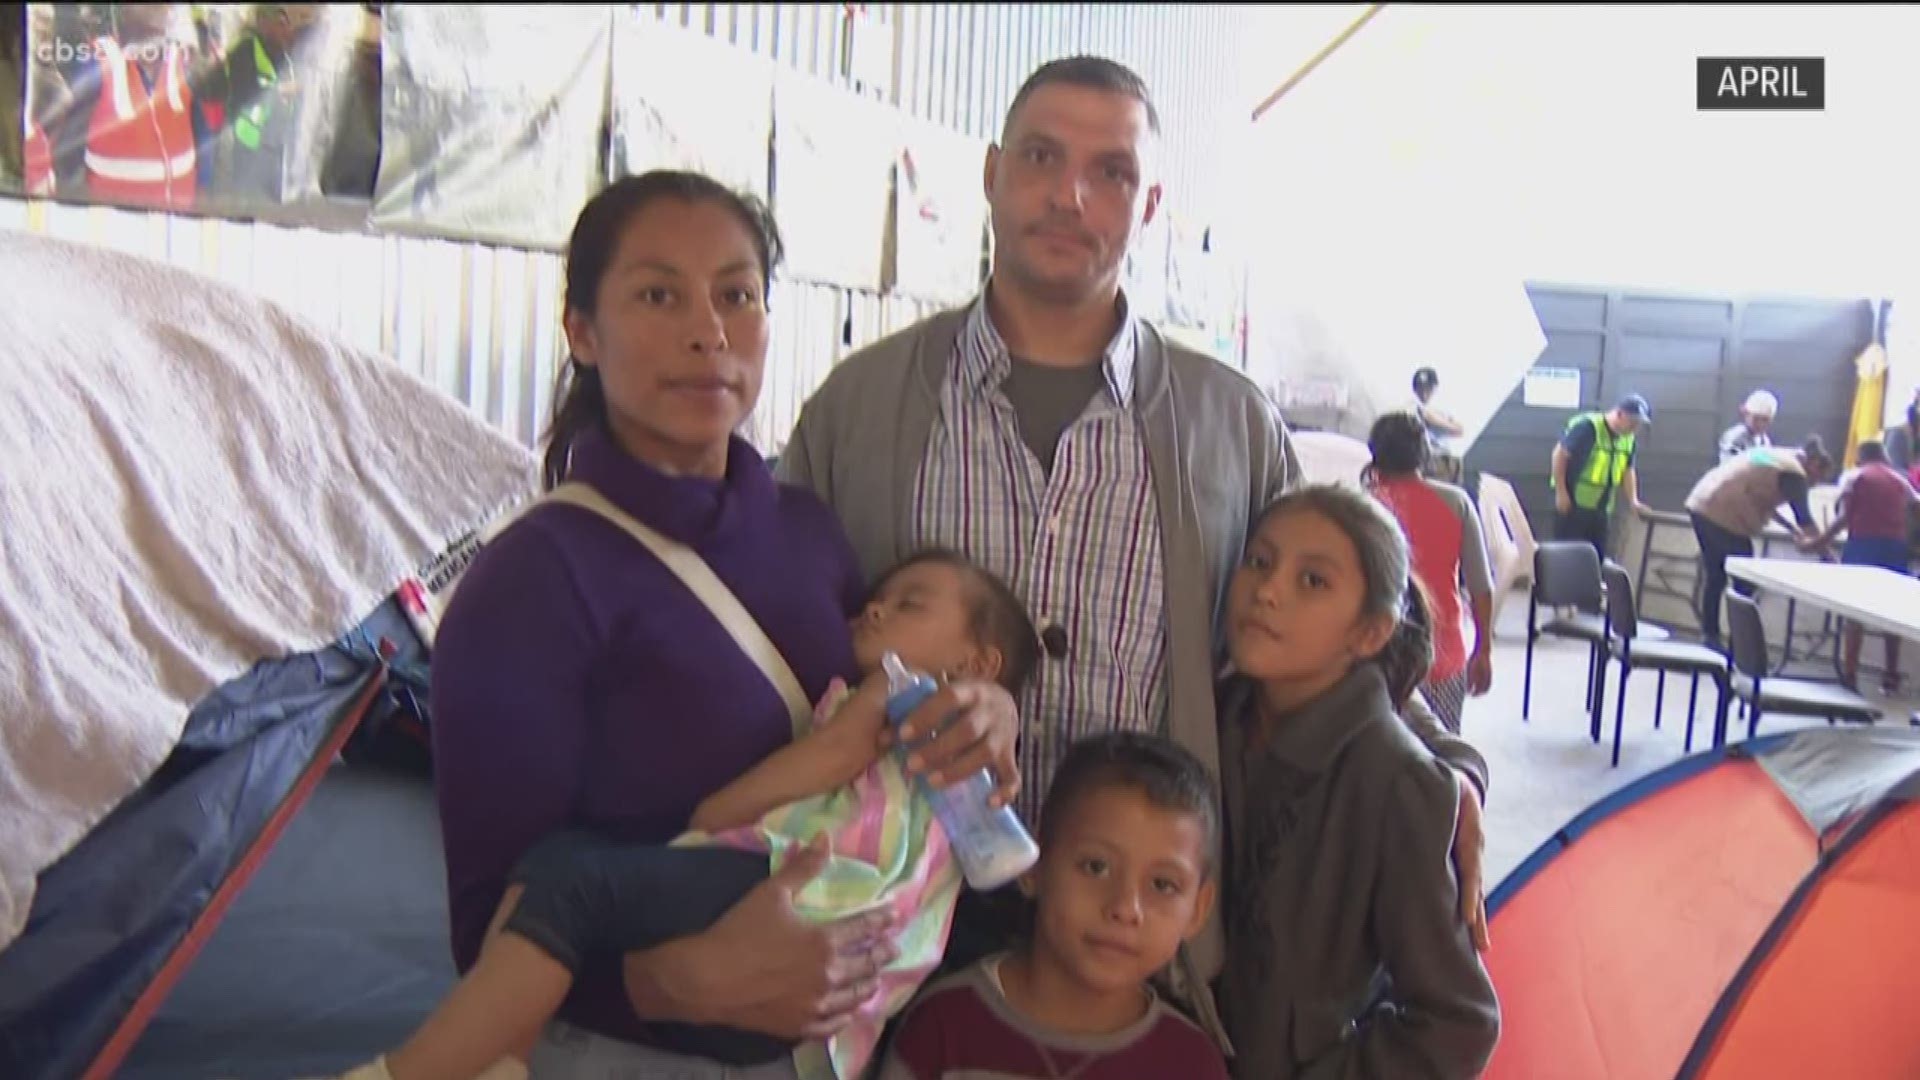 The family of a U.S. citizen living in Tijuana shelters for the past four months has crossed the border at San Ysidro to claim asylum.